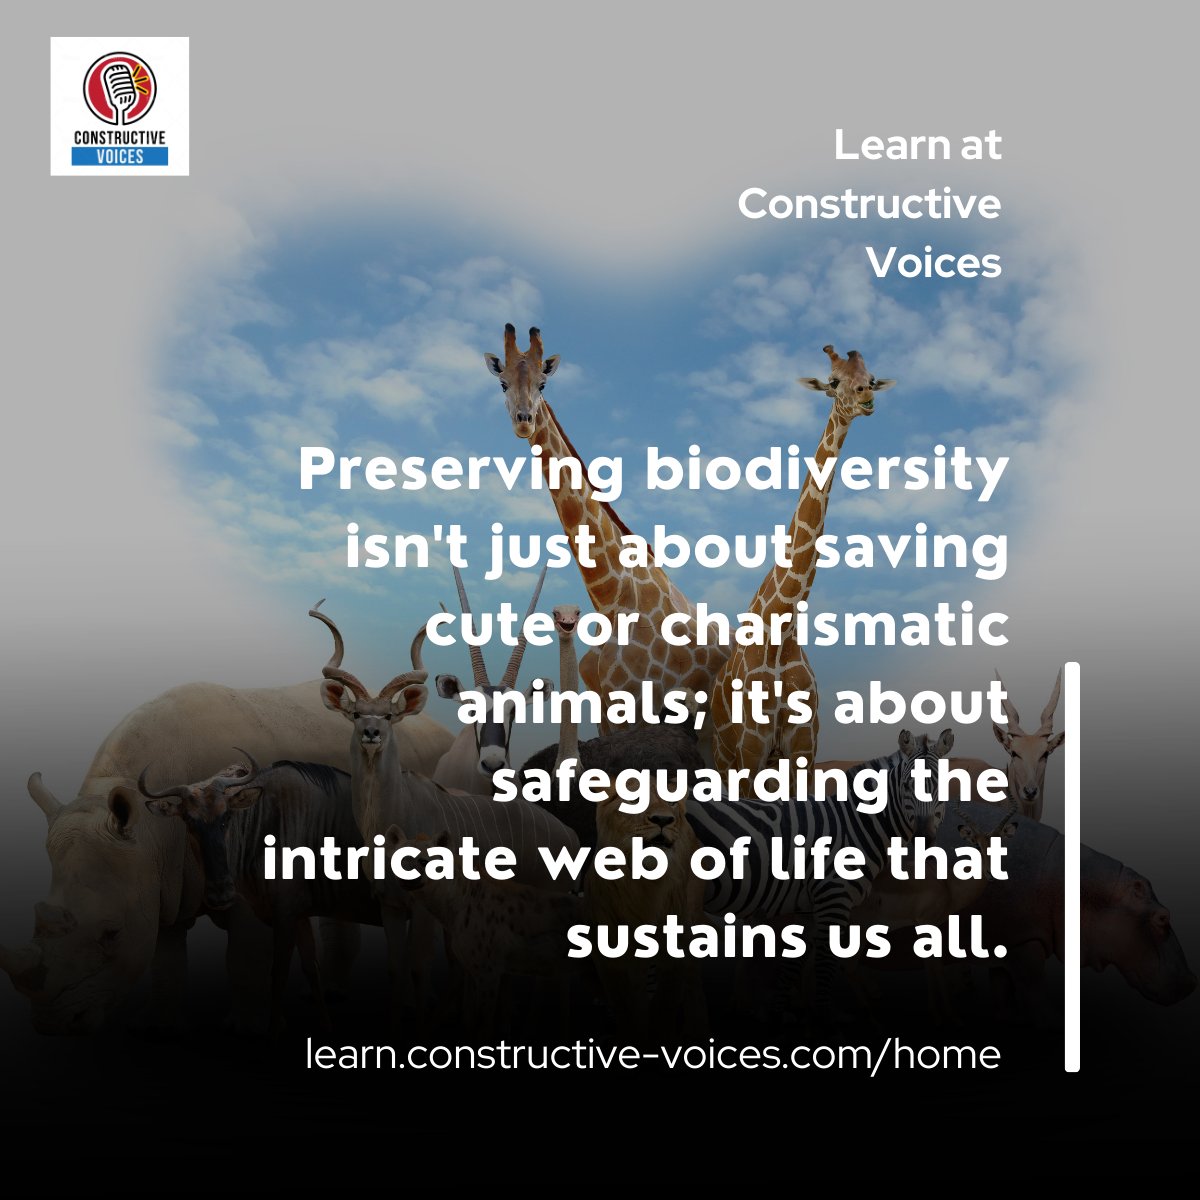 'Preserving biodiversity isn't just about saving cute or charismatic animals; it's about safeguarding the intricate web of life that sustains us all.' #biodiversity #biodiversitynetgain #training - learn.constructive-voices.com/home/